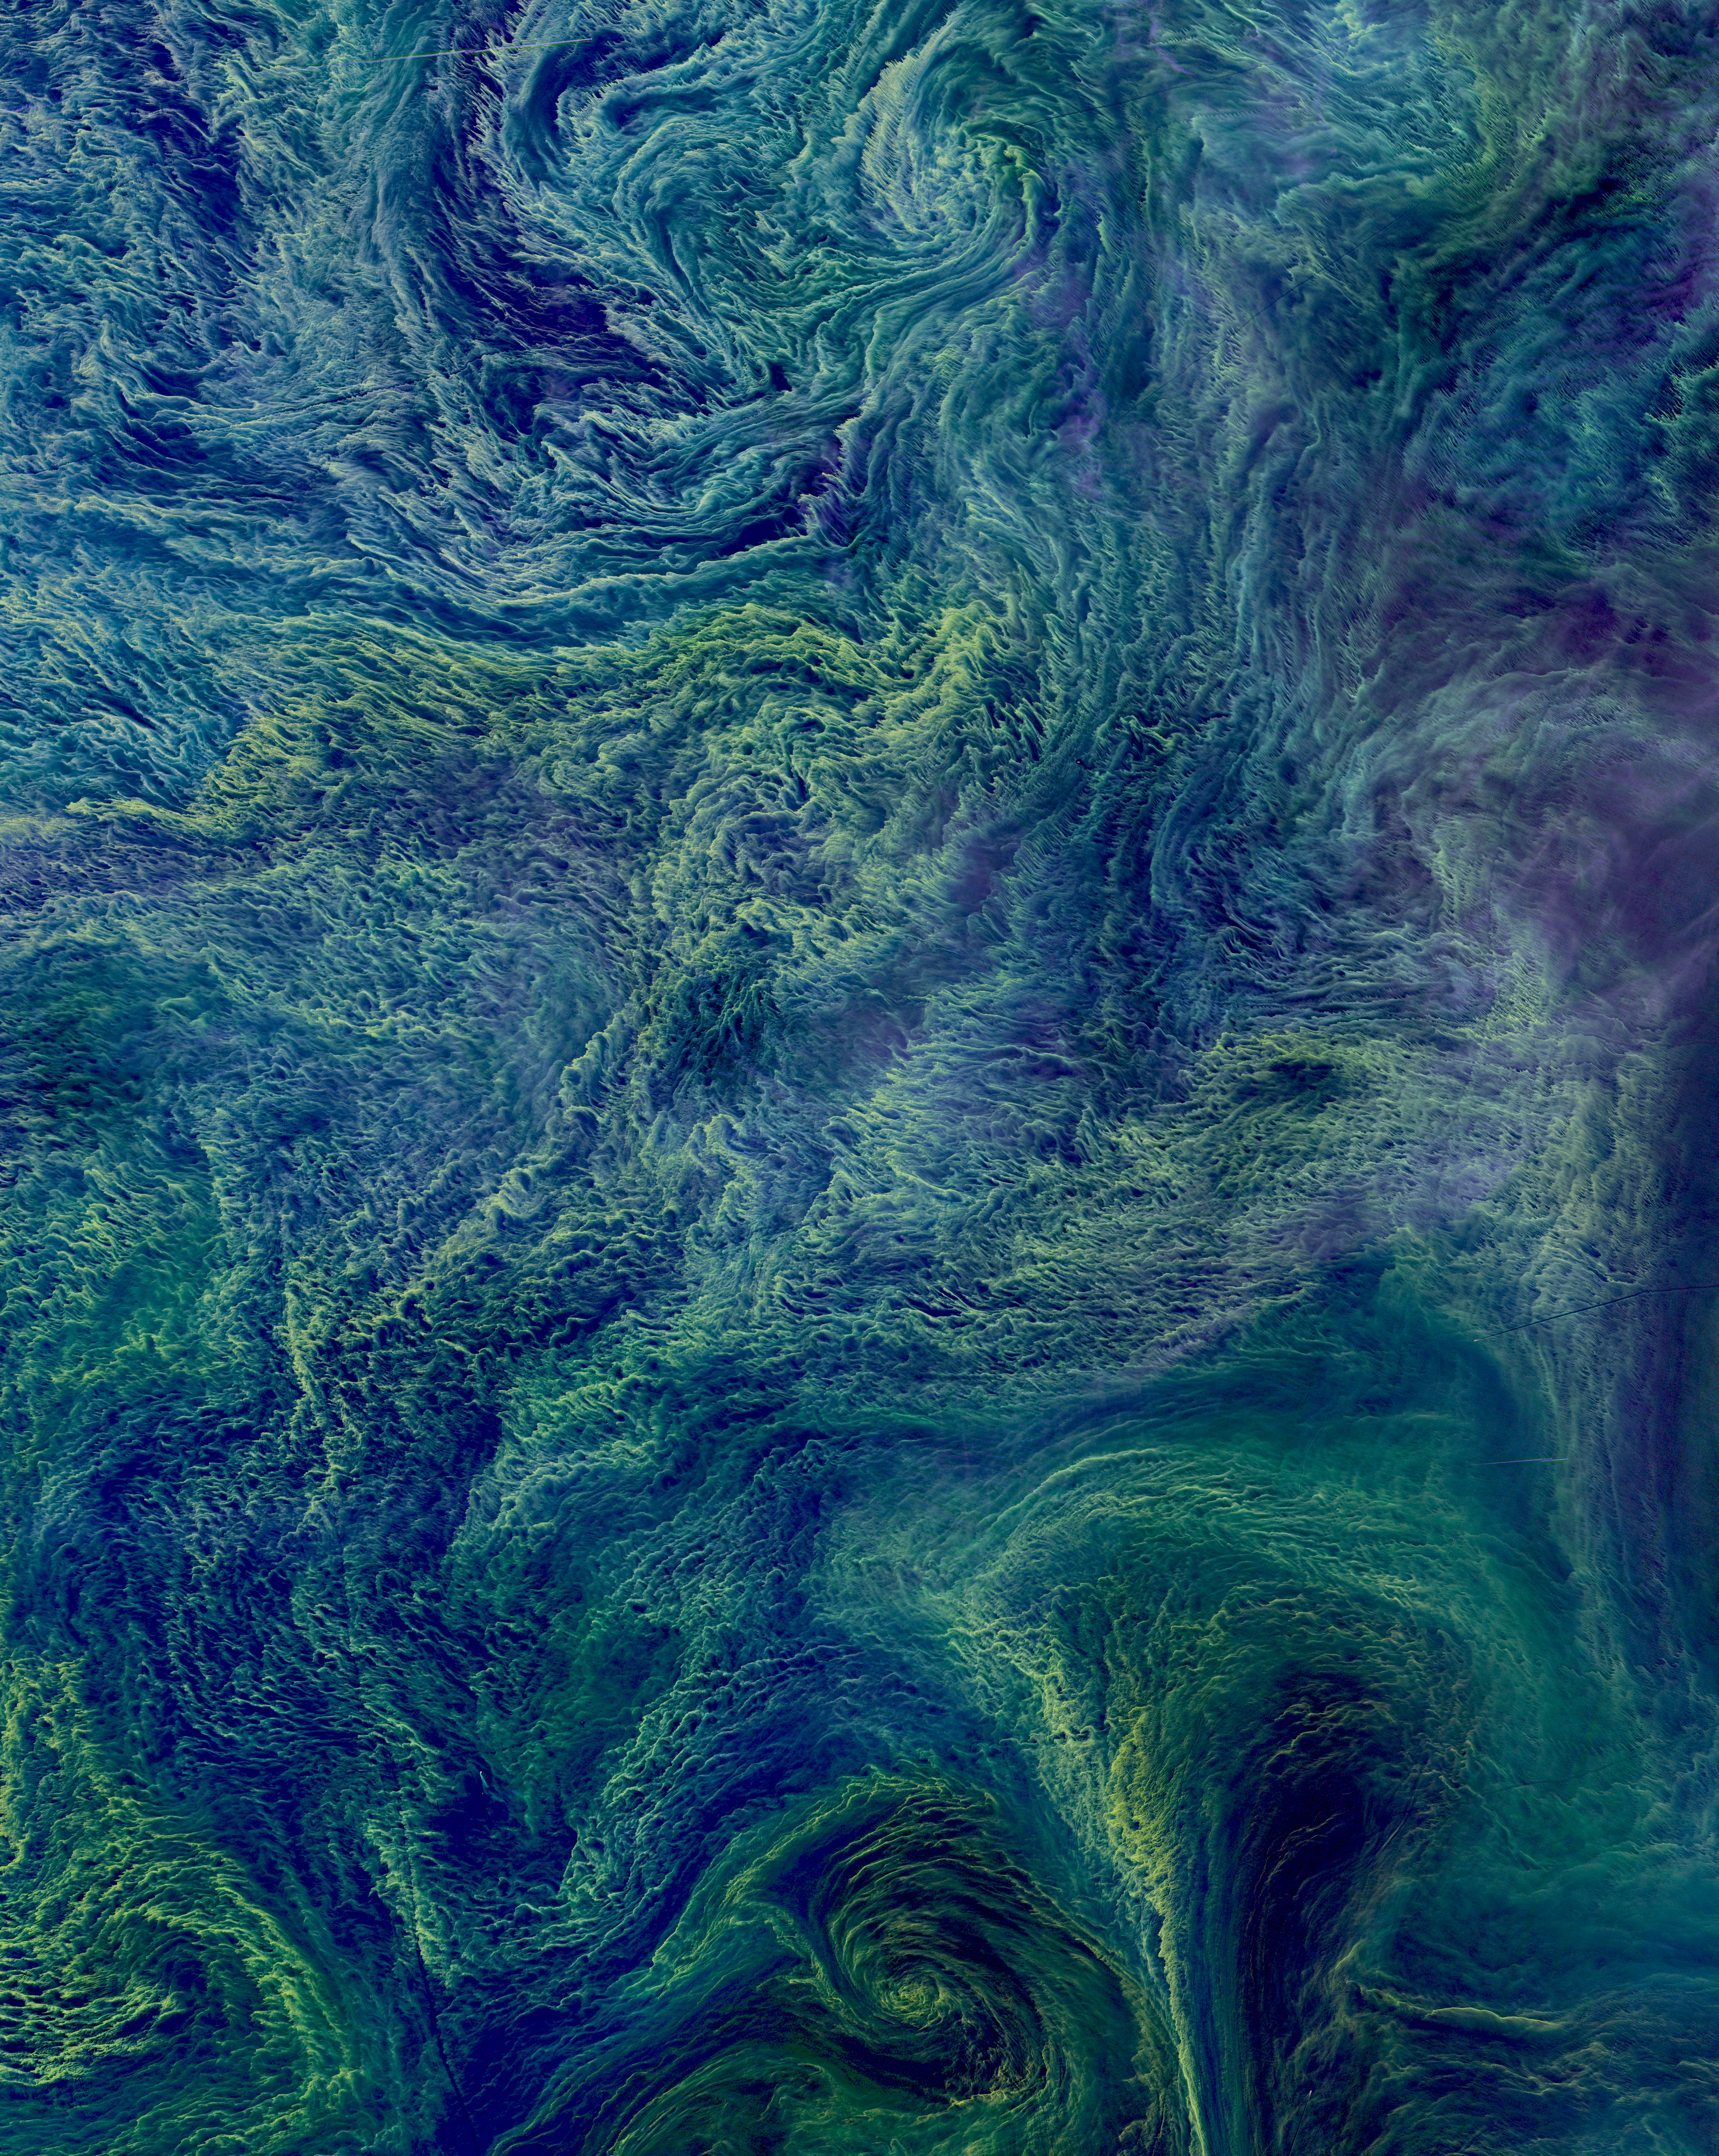 In August 2015 a massive bloom of cyanobacteria - more than 100 square kilometers - was seen in the Baltic Sea. Cyanobacteria are a type of marine bacteria that capture and store solar energy through photosynthesis. While some are toxic to humans and animals, large blooms can cause an oxygen-depleted dead zone where other organisms cannot survive. Scientists believe that blooms are more likely to form in the presence agricultural and industrial run-off or from cruise ships that provide excessive nutrients for the bacteria through the dumping of sewage.